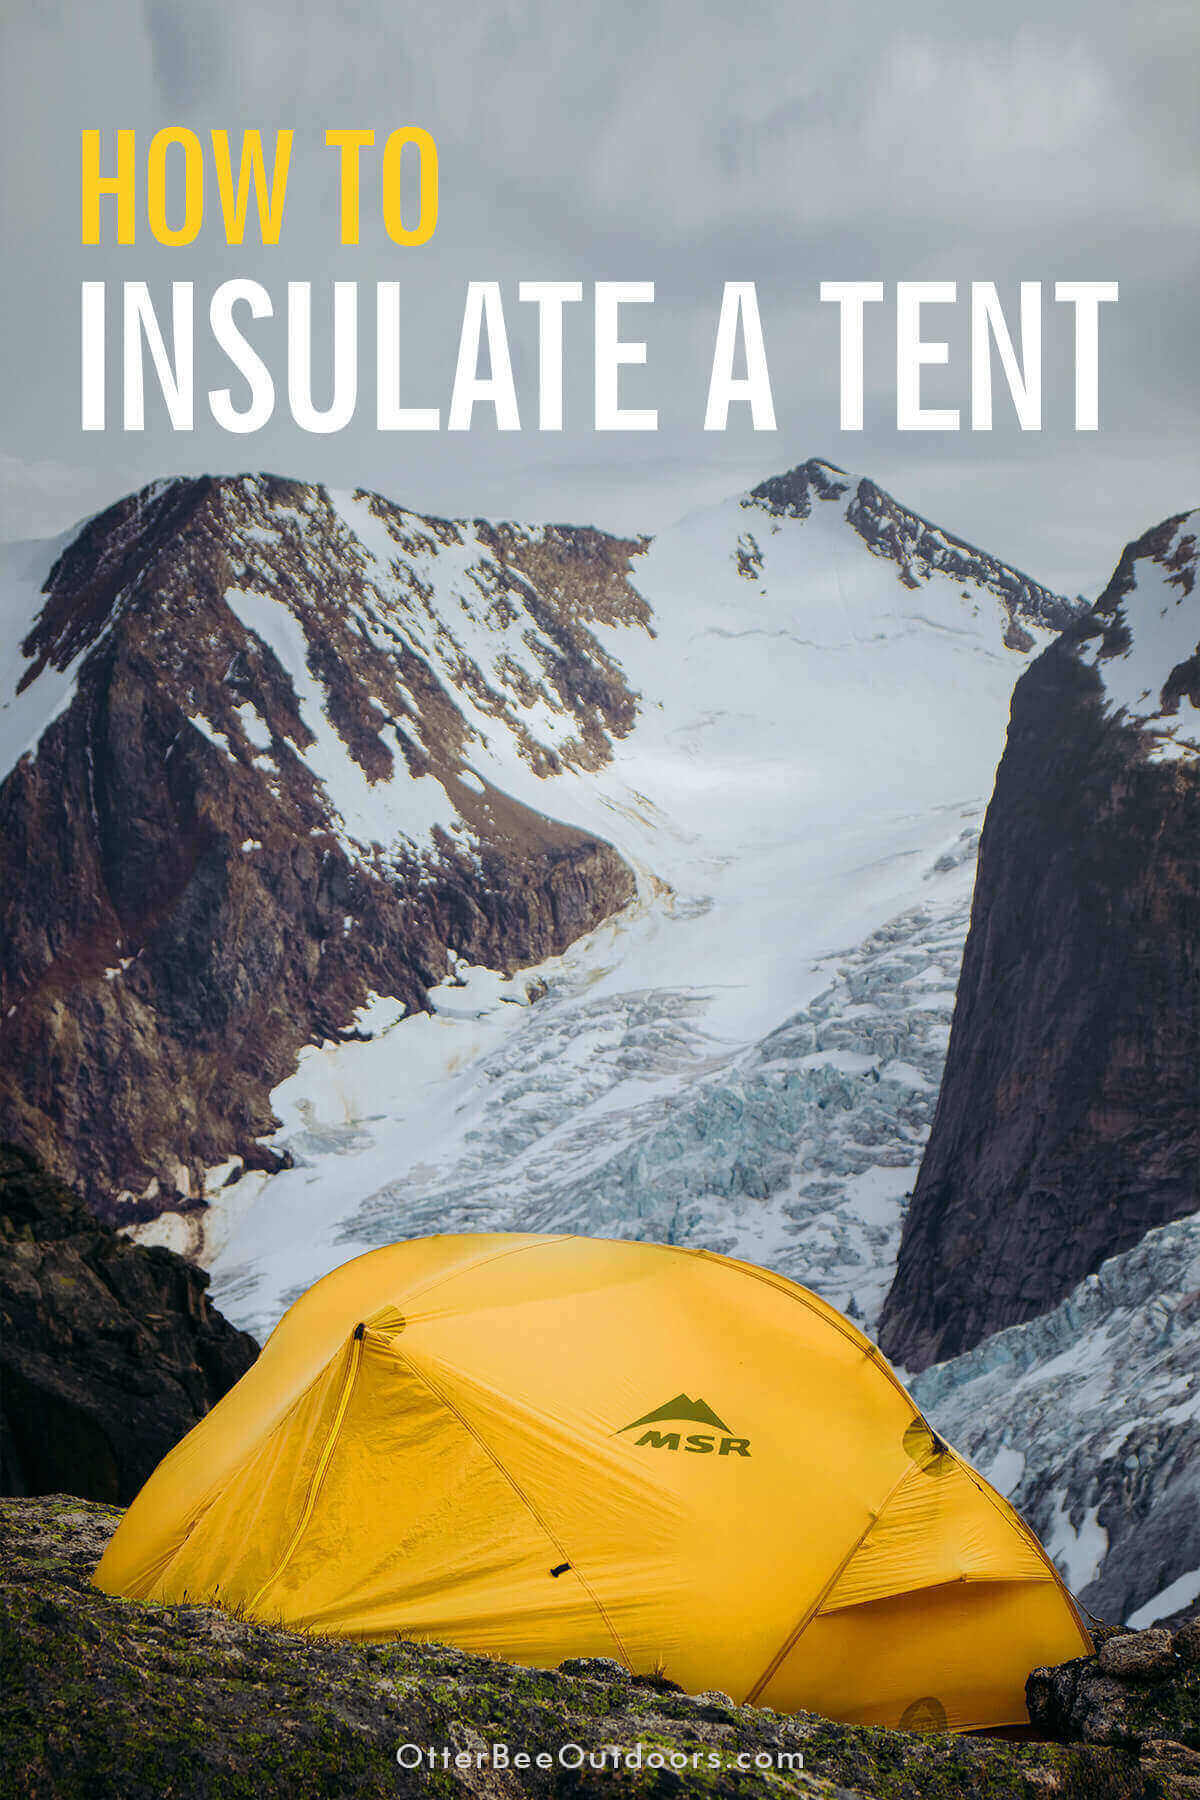 A yellow, MSR 4-season insulated tent set up in the mountains during winter.